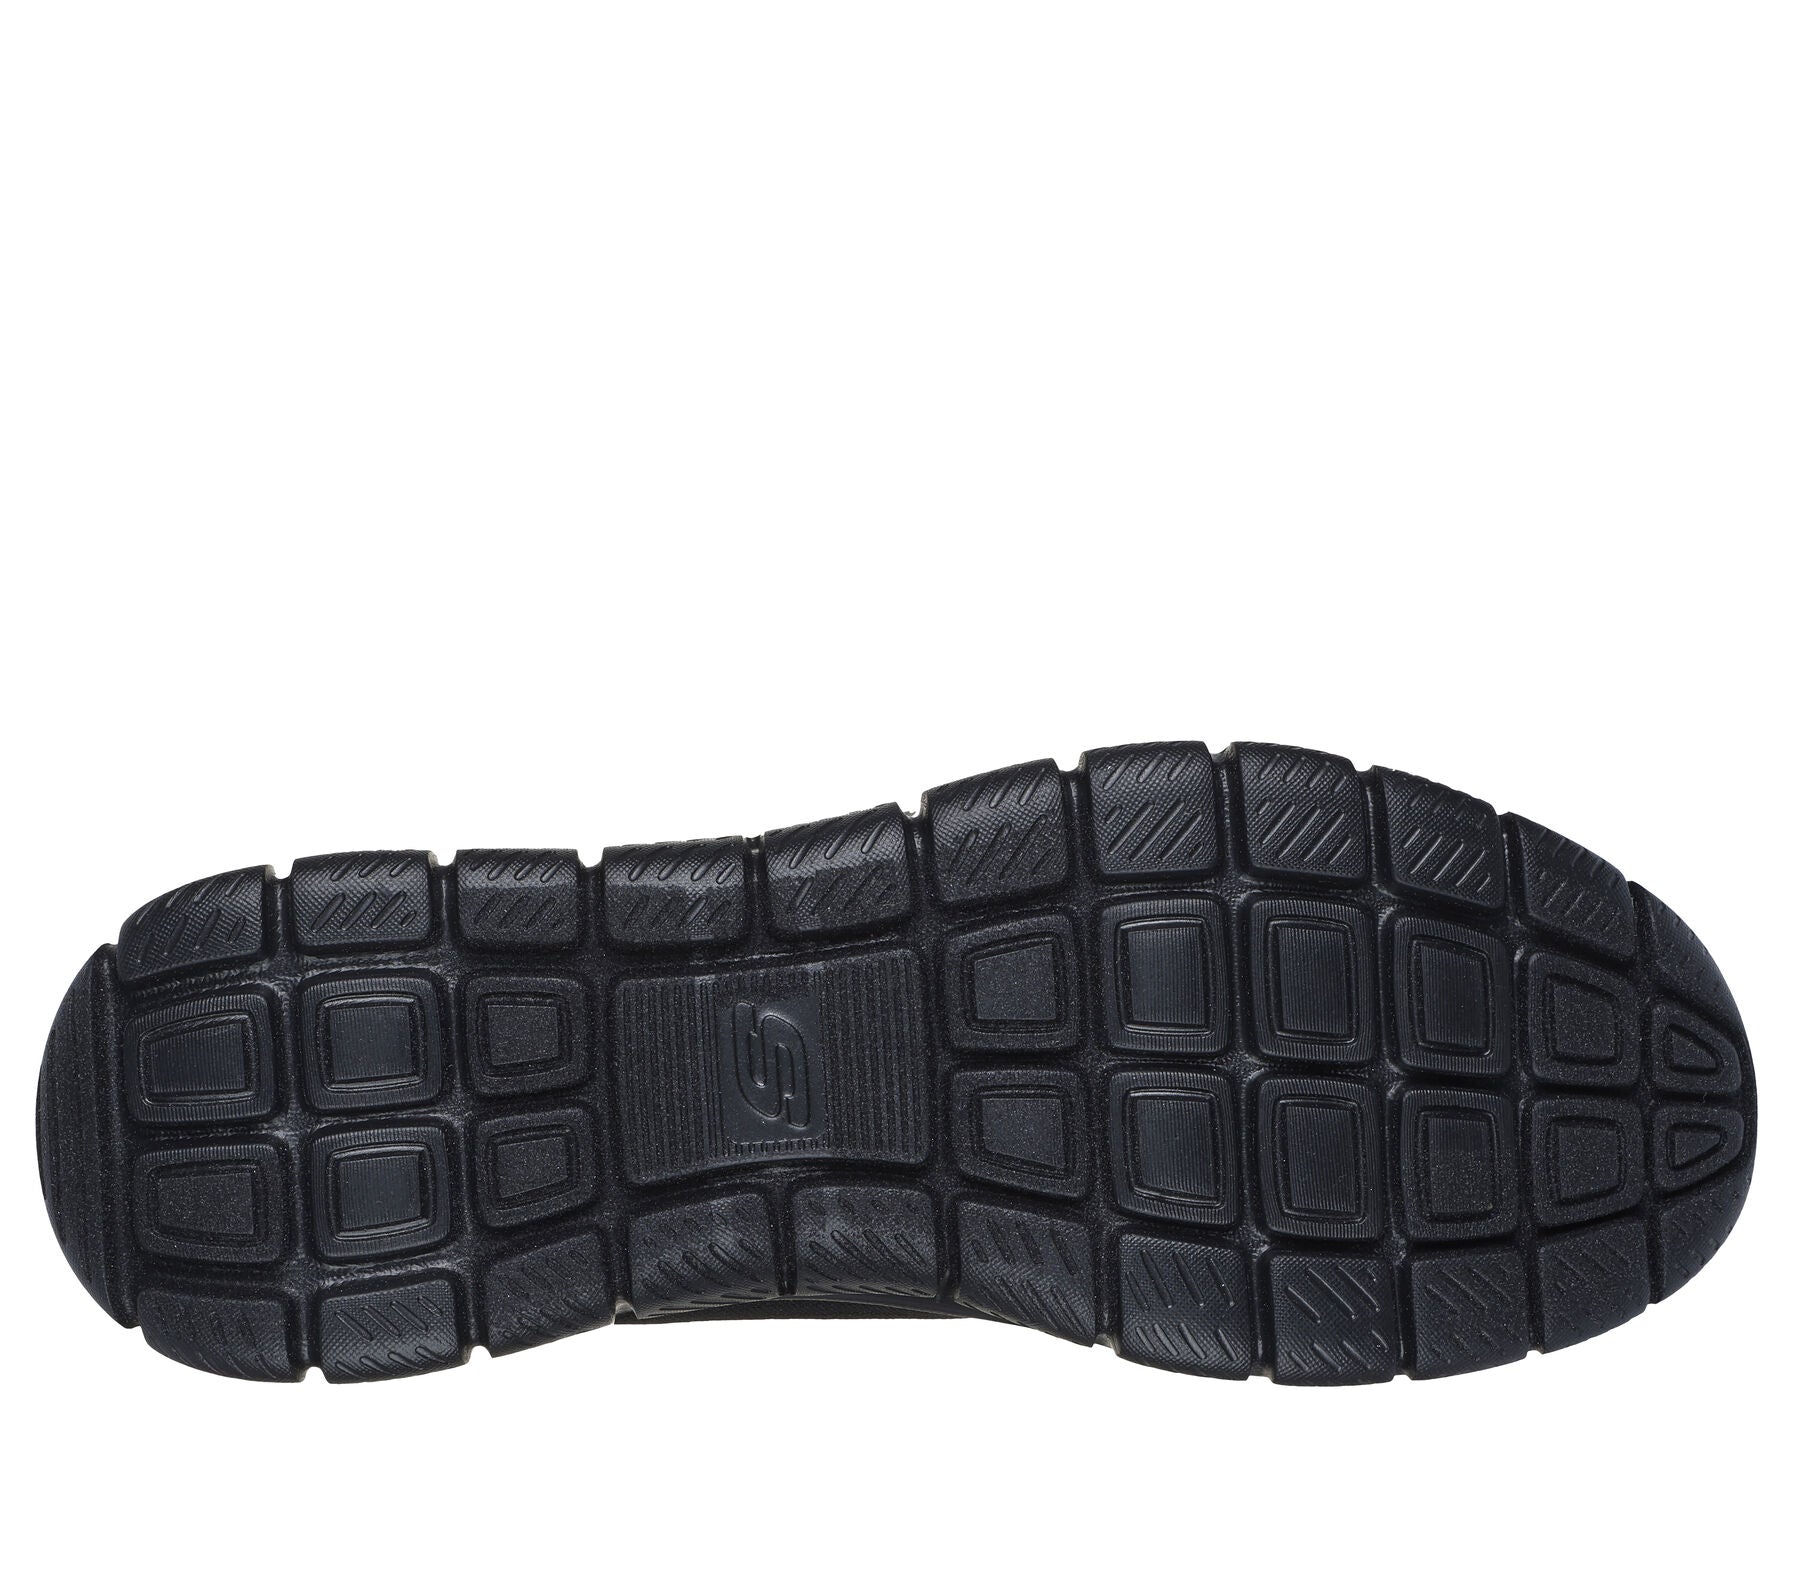 Side view showing the black flexible cushioned midsole.